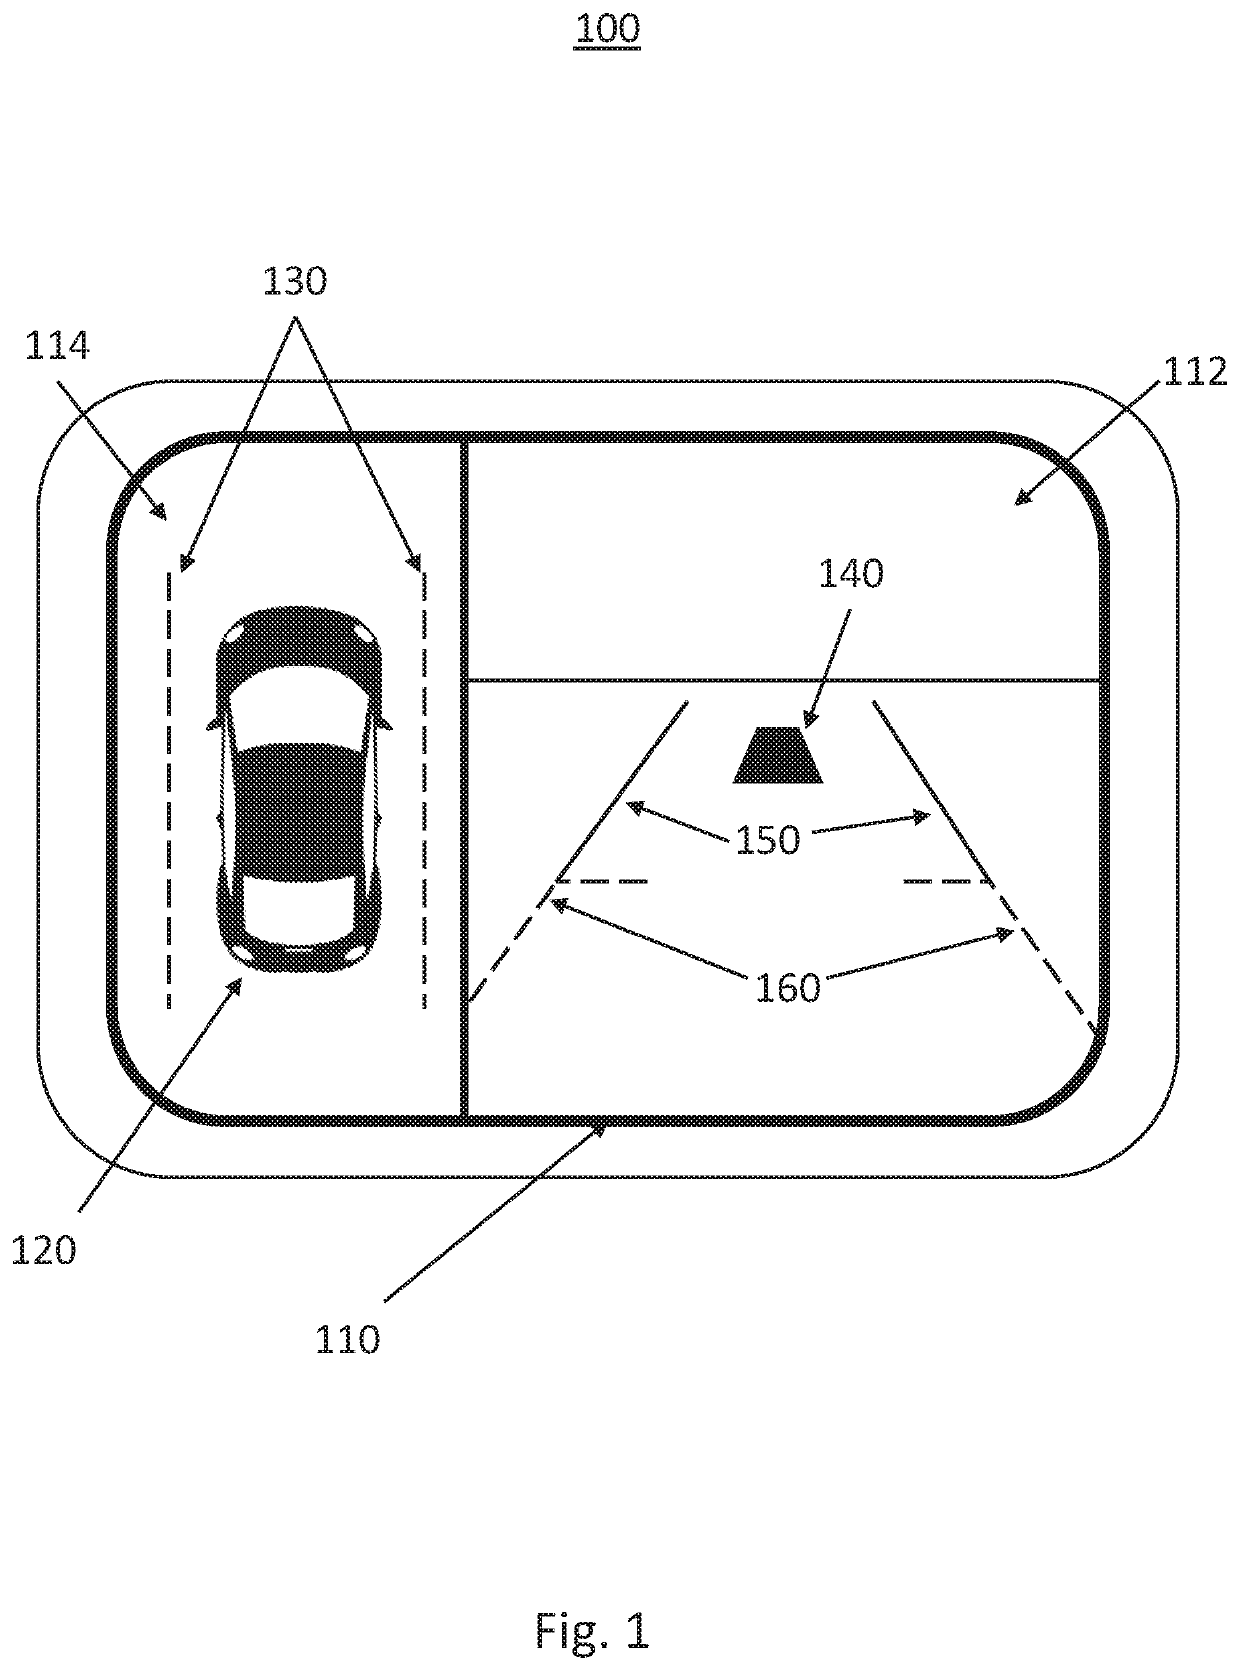 Method and apparatus for aligning a vehicle with a wireless charging system